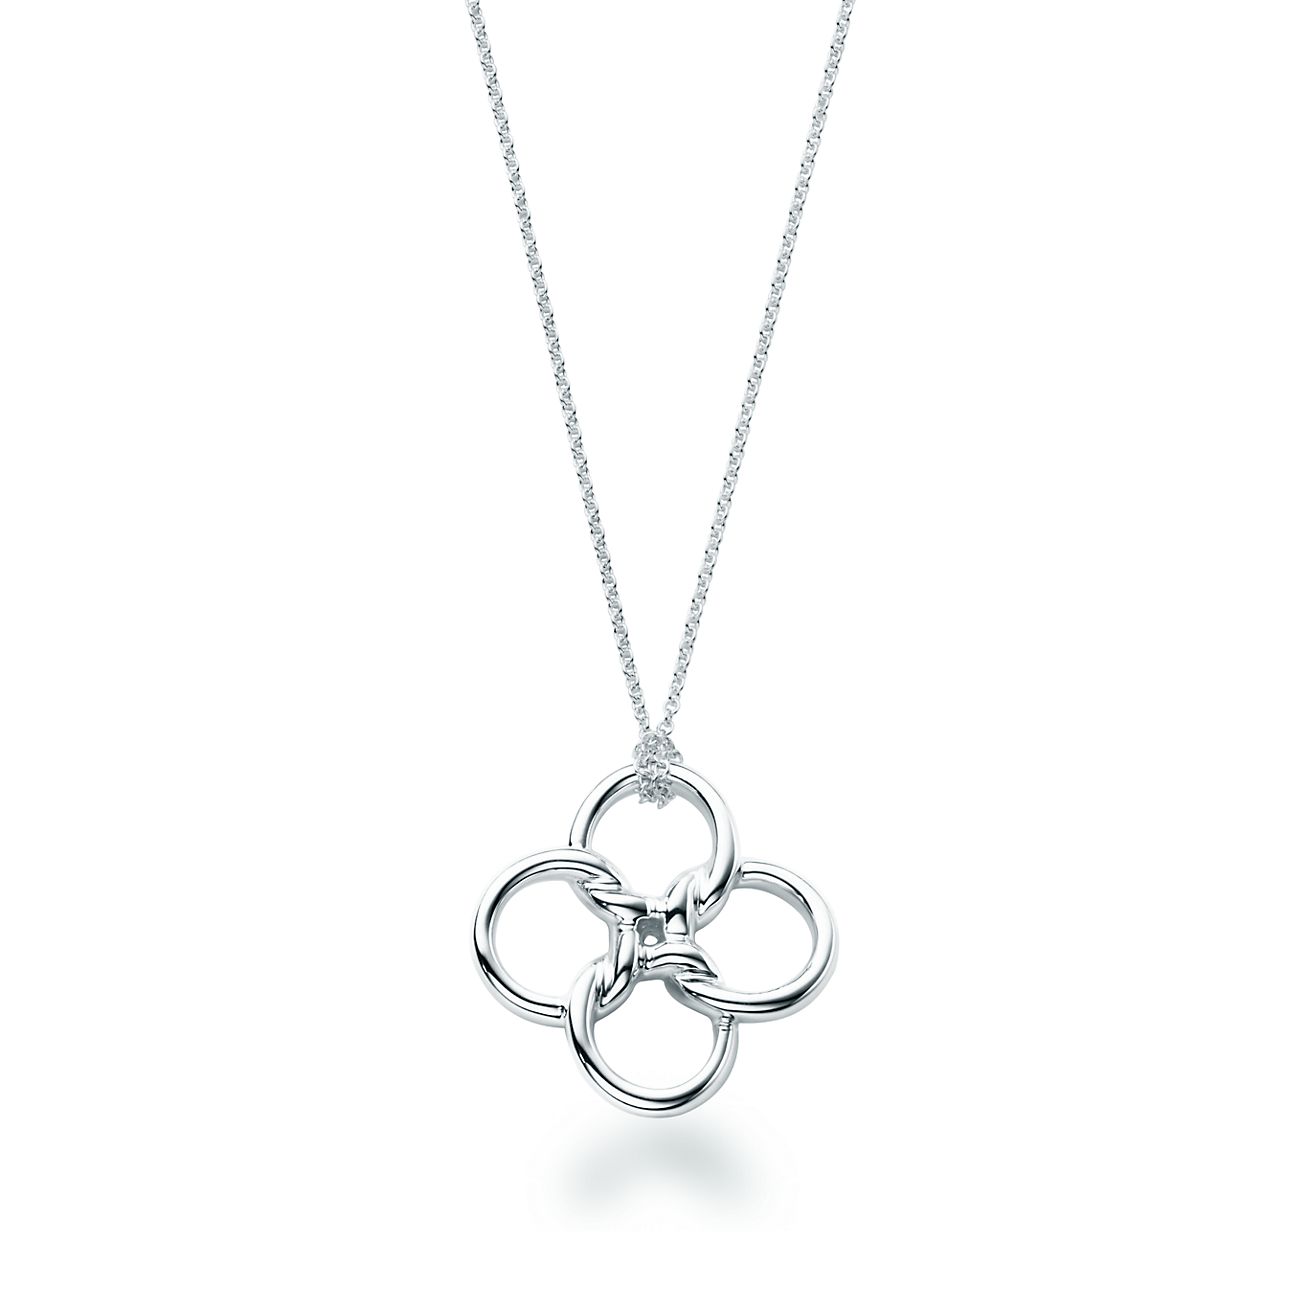 Tiffany and Co. Four-Leaf Clover Charm Necklace 18 Karat Gold Estate  Jewelry at 1stDibs | four leaf clover necklace tiffany, tiffany clover  necklace, tiffany four leaf clover